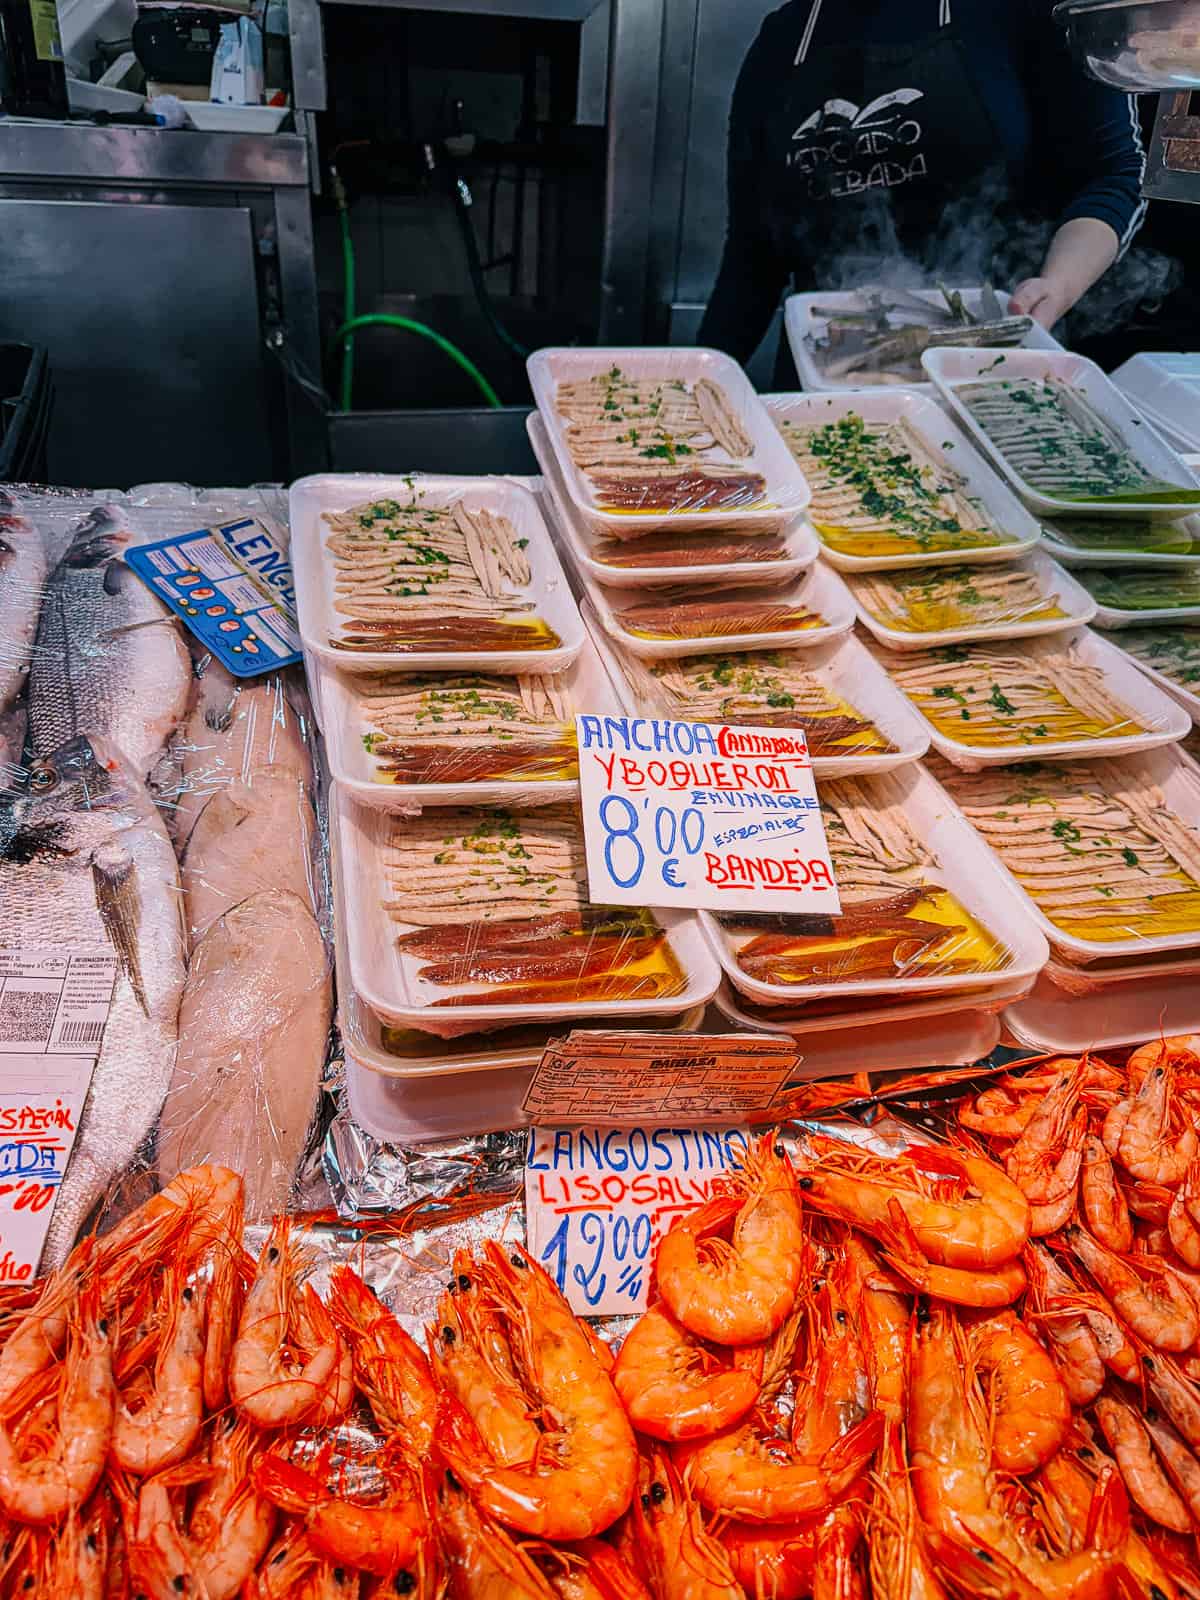 A seafood stall displays fresh anchovies in vinegar and succulent langoustines with prices labeled, providing a colorful and appetizing glimpse into the culinary delights offered at a Spanish market